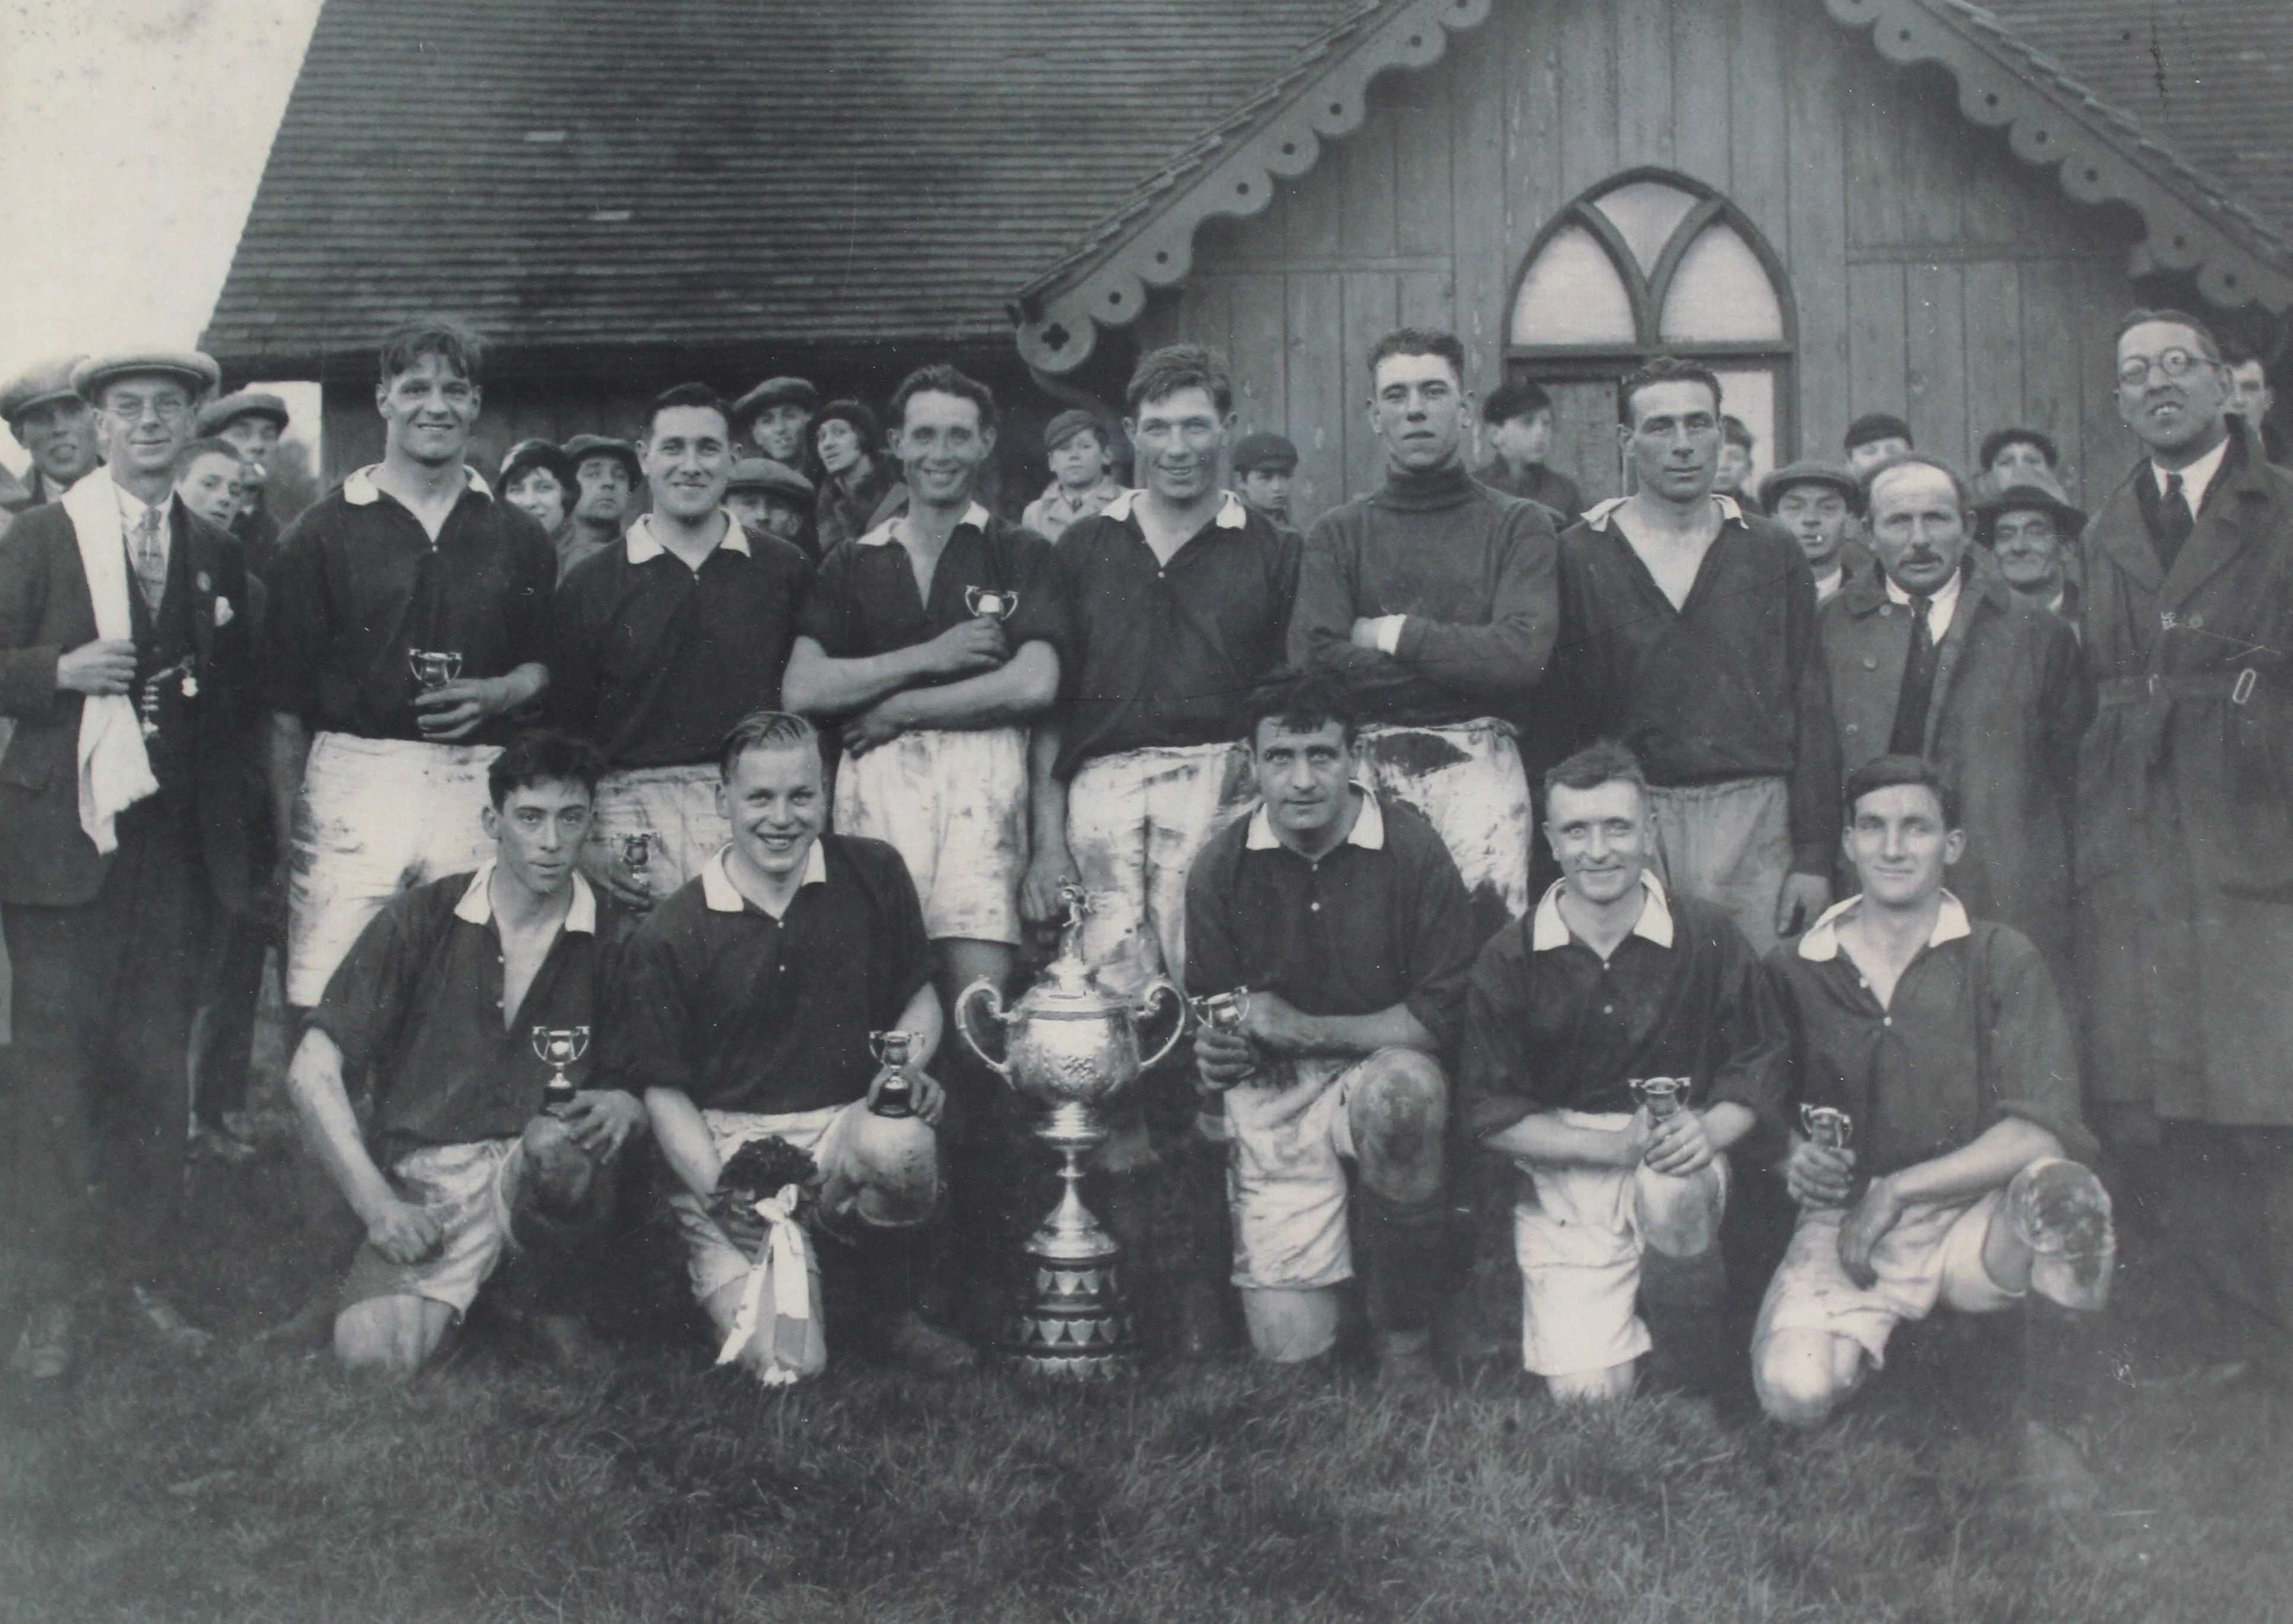 100 Years of Wisbech Town FC History goes online